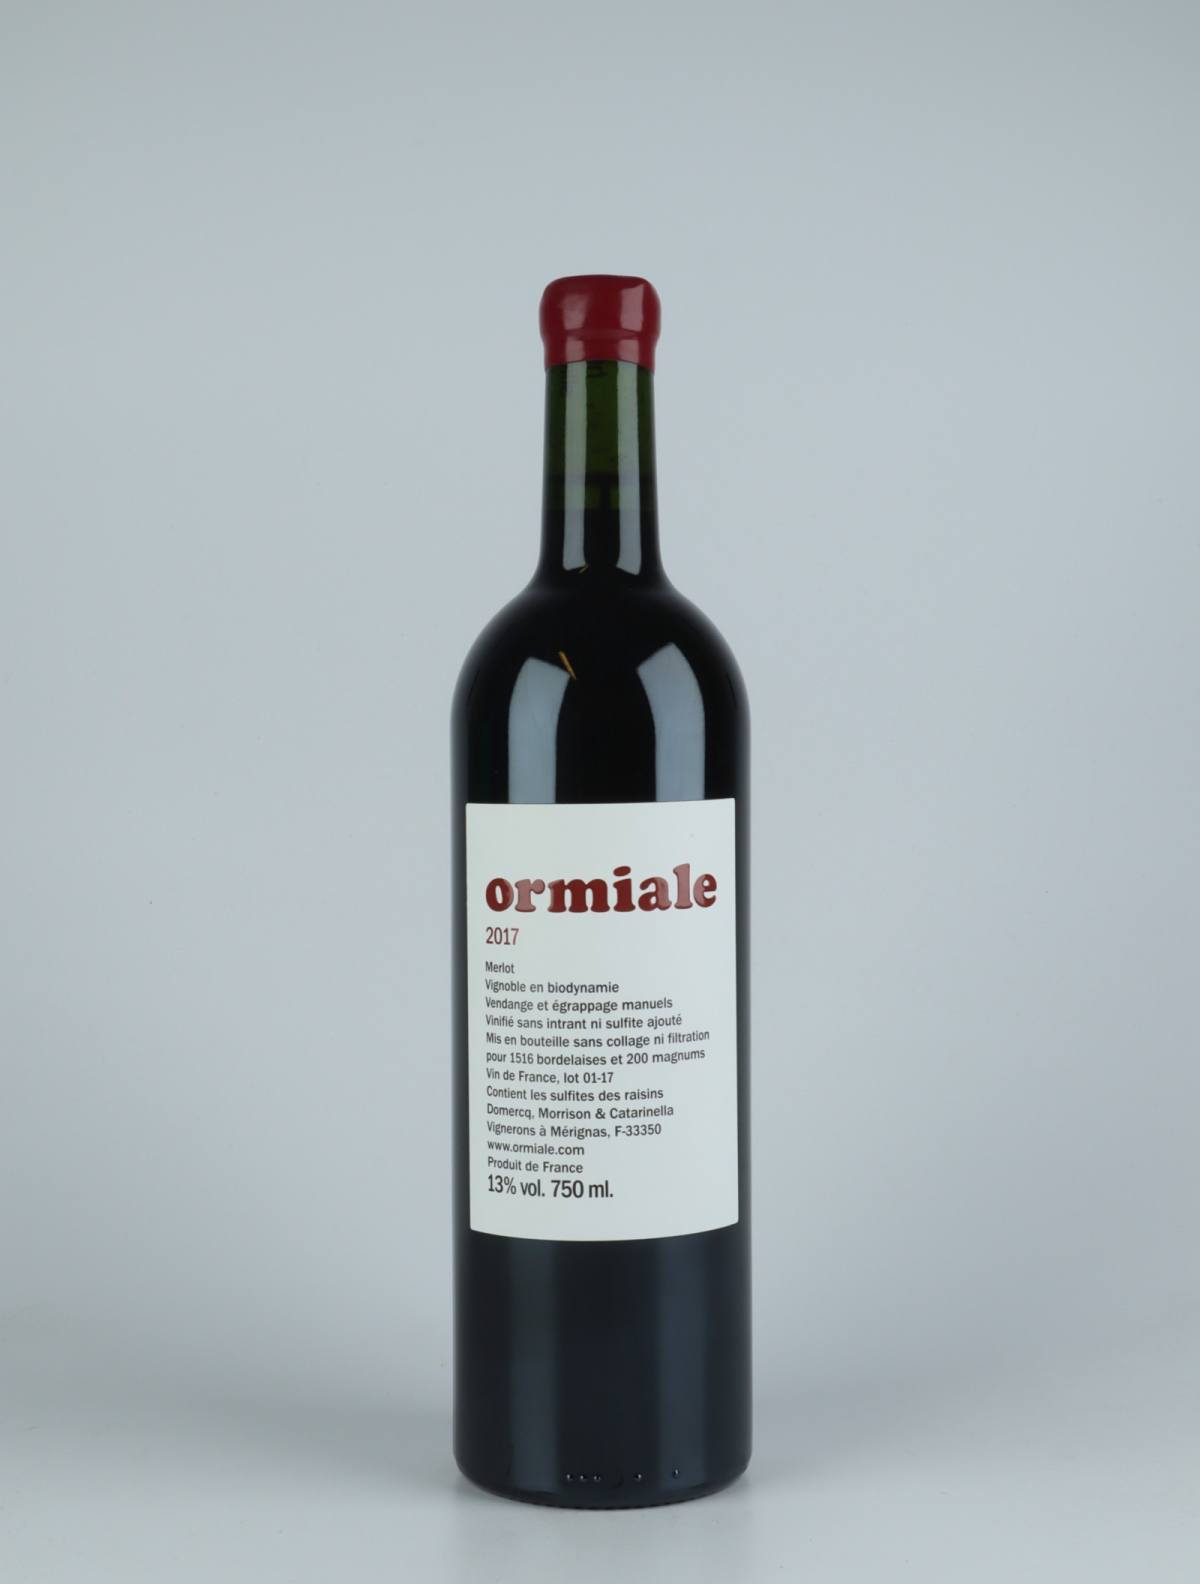 A bottle 2017 Ormiale Red wine from Ormiale, Bordeaux in France